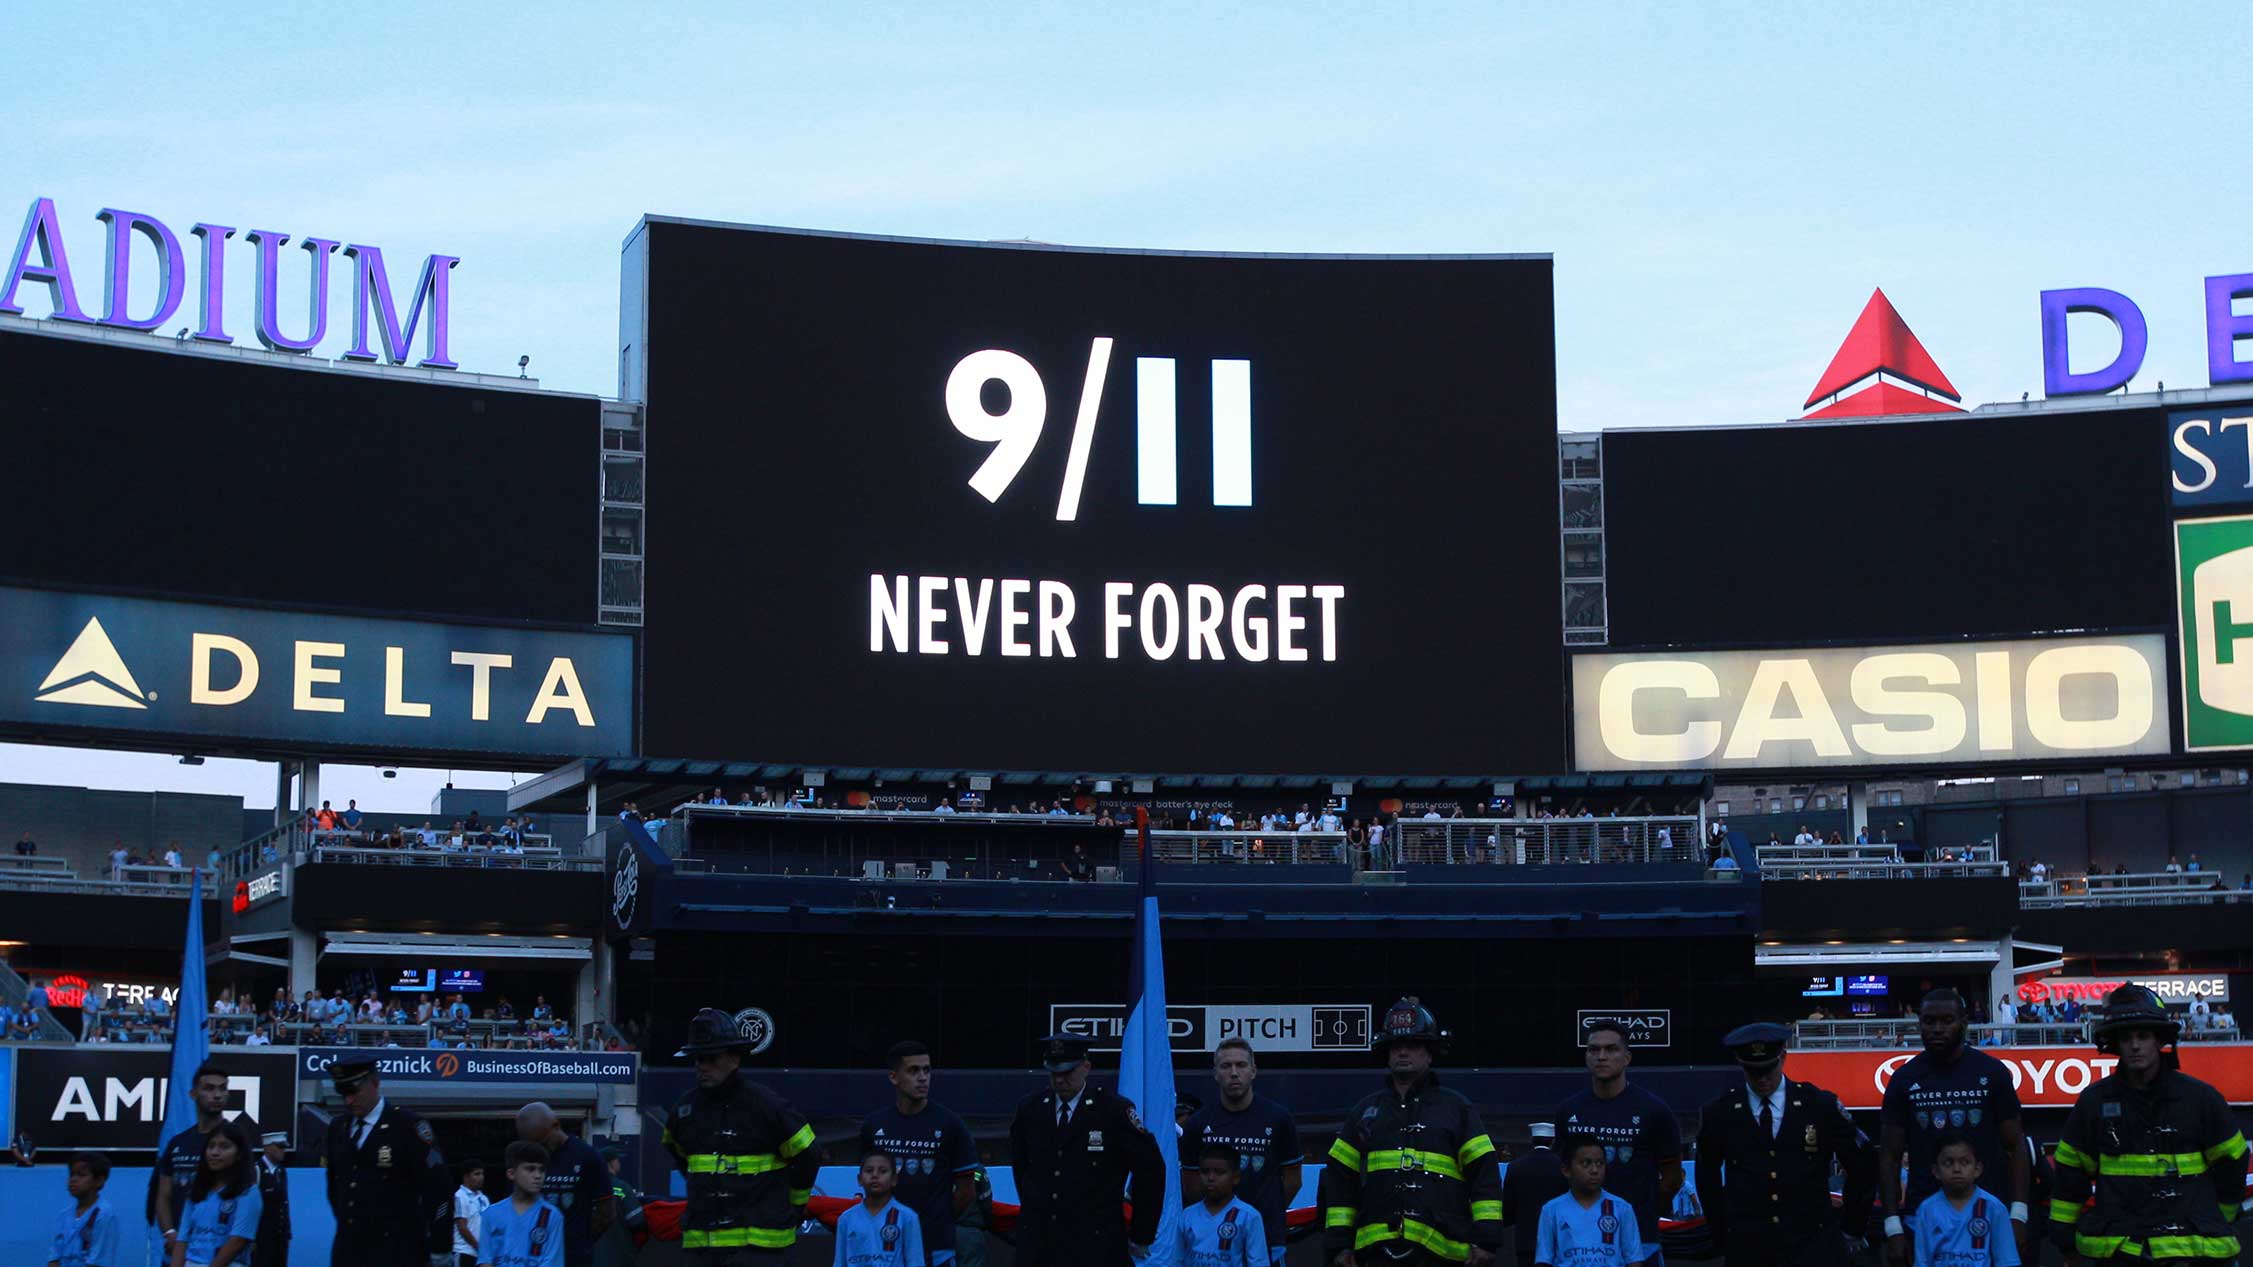 Mets, Yankees and more pay tribute on 9/11 20th anniversary